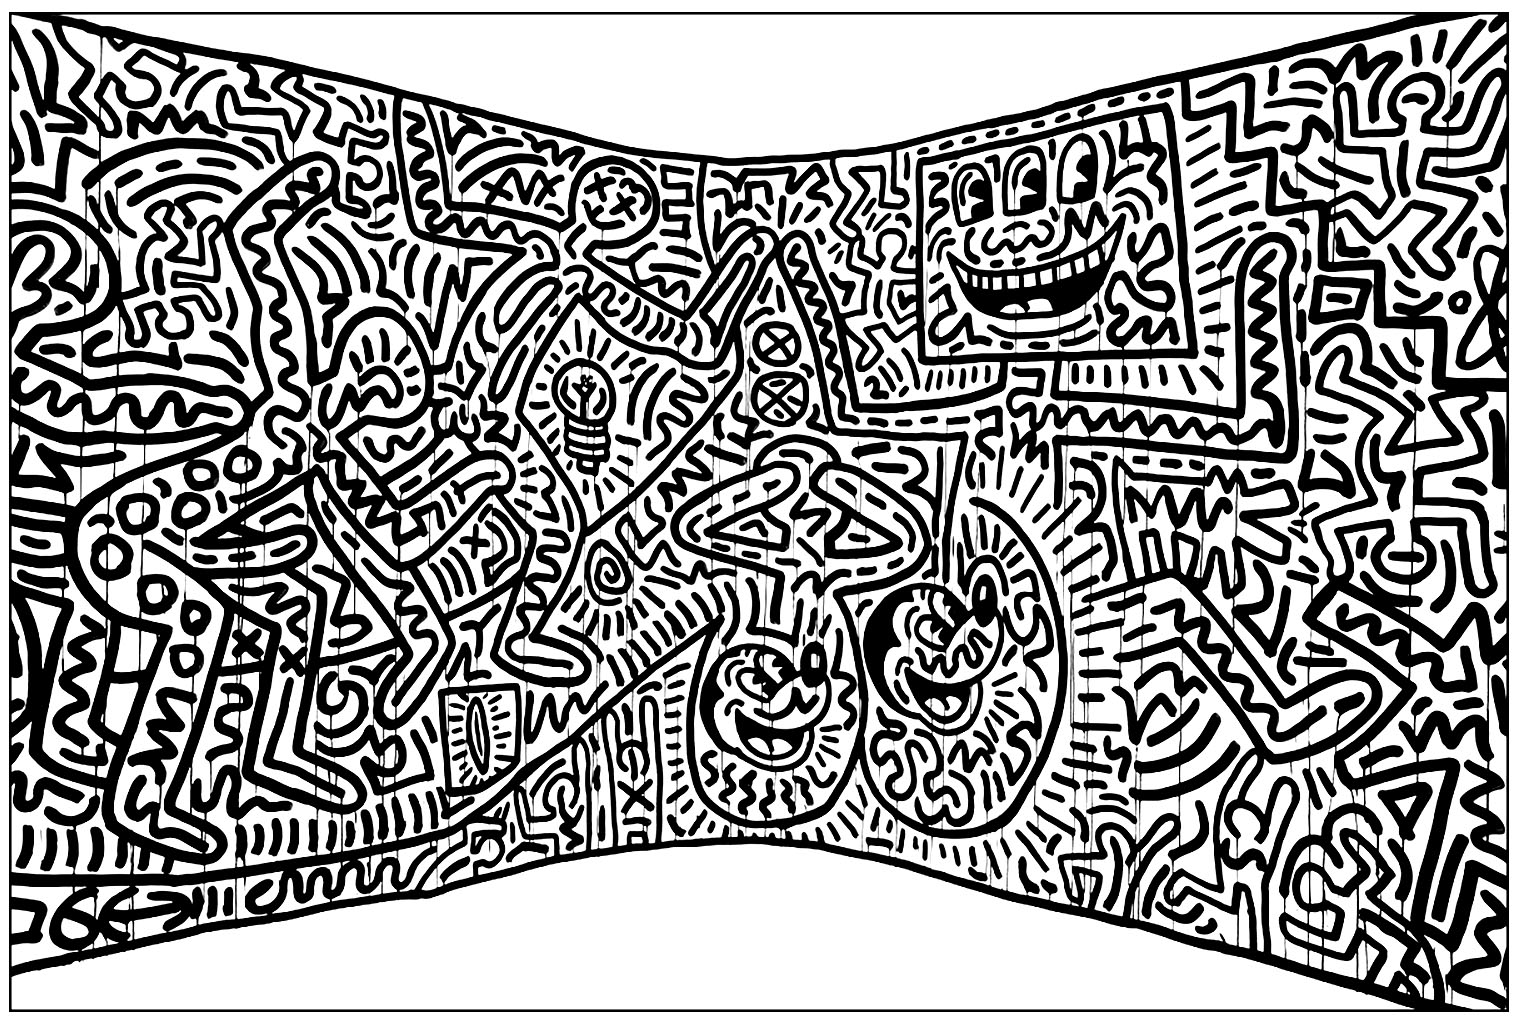 Coloring page created from a Keith Haring fresco